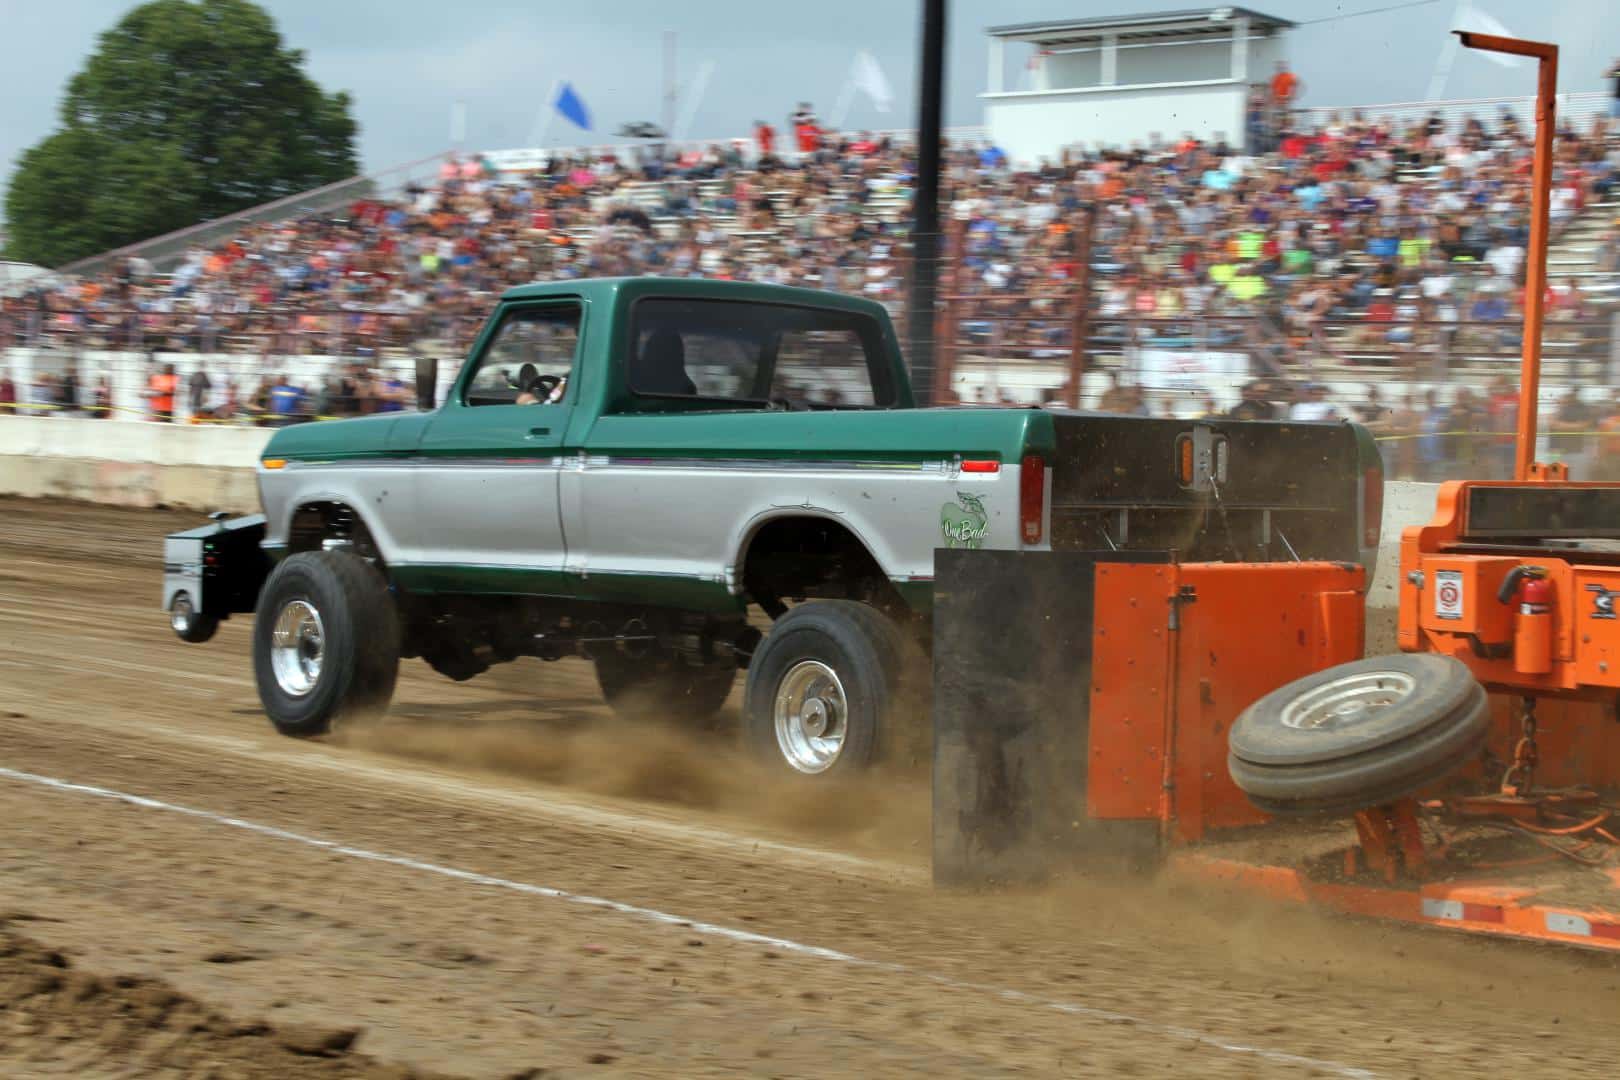 Two Tone Chevy Badger Truck Pulling Wisconsin